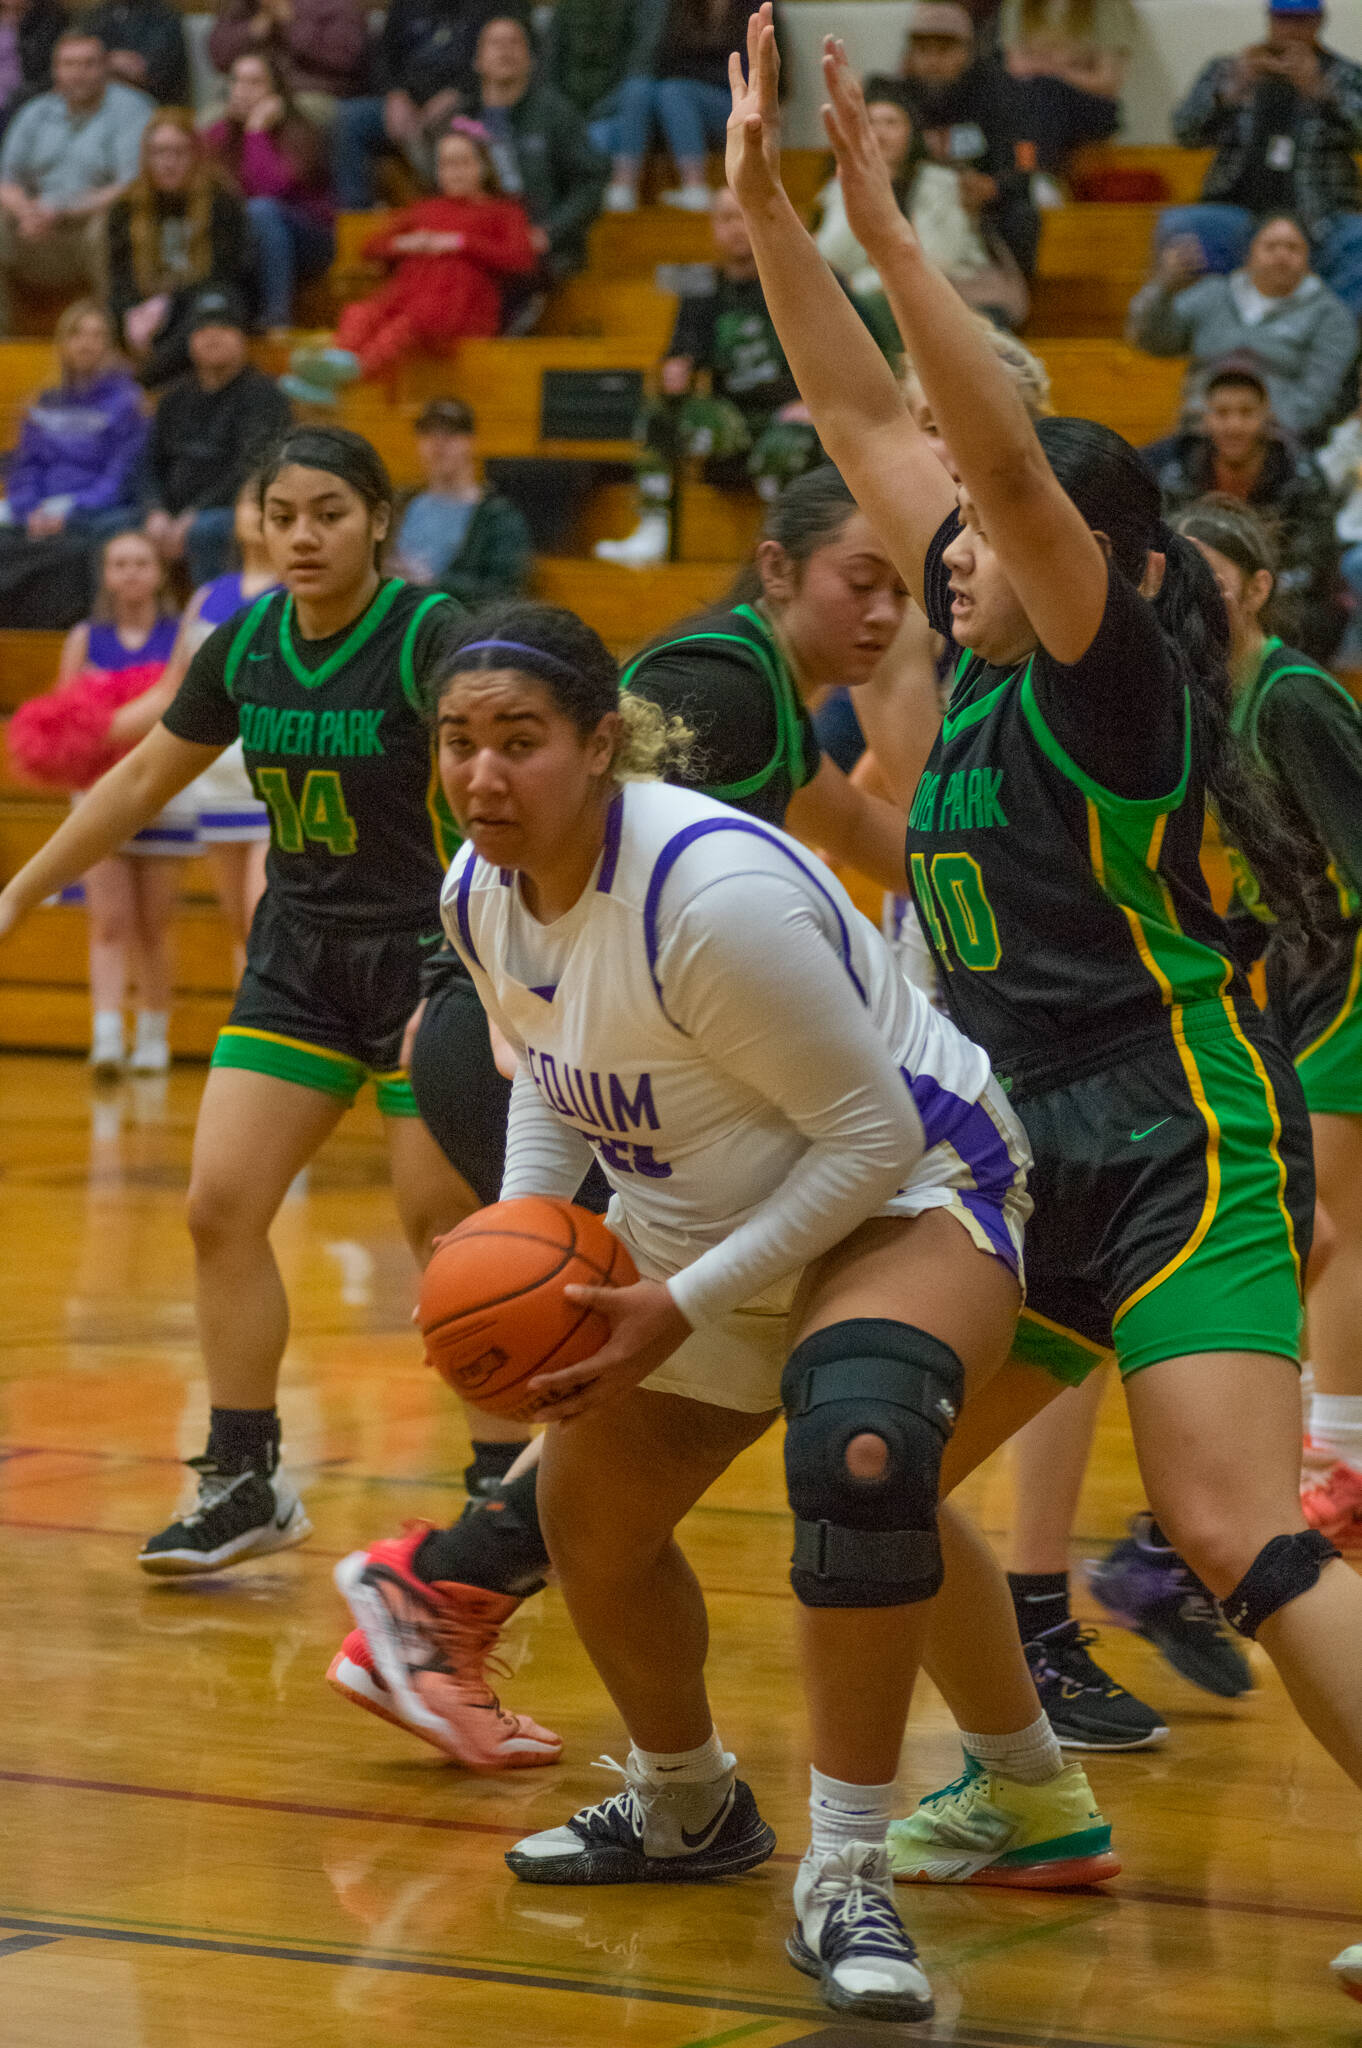 Sequim post Jelissa Julmist looks to score as Clover Park’s Alicia-Ellalynn Soliai defends the basket in Sequim’s 65-29 district tourney win on Feb. 14. Julmist had 13 points, five rebounds and four steals in the victory.